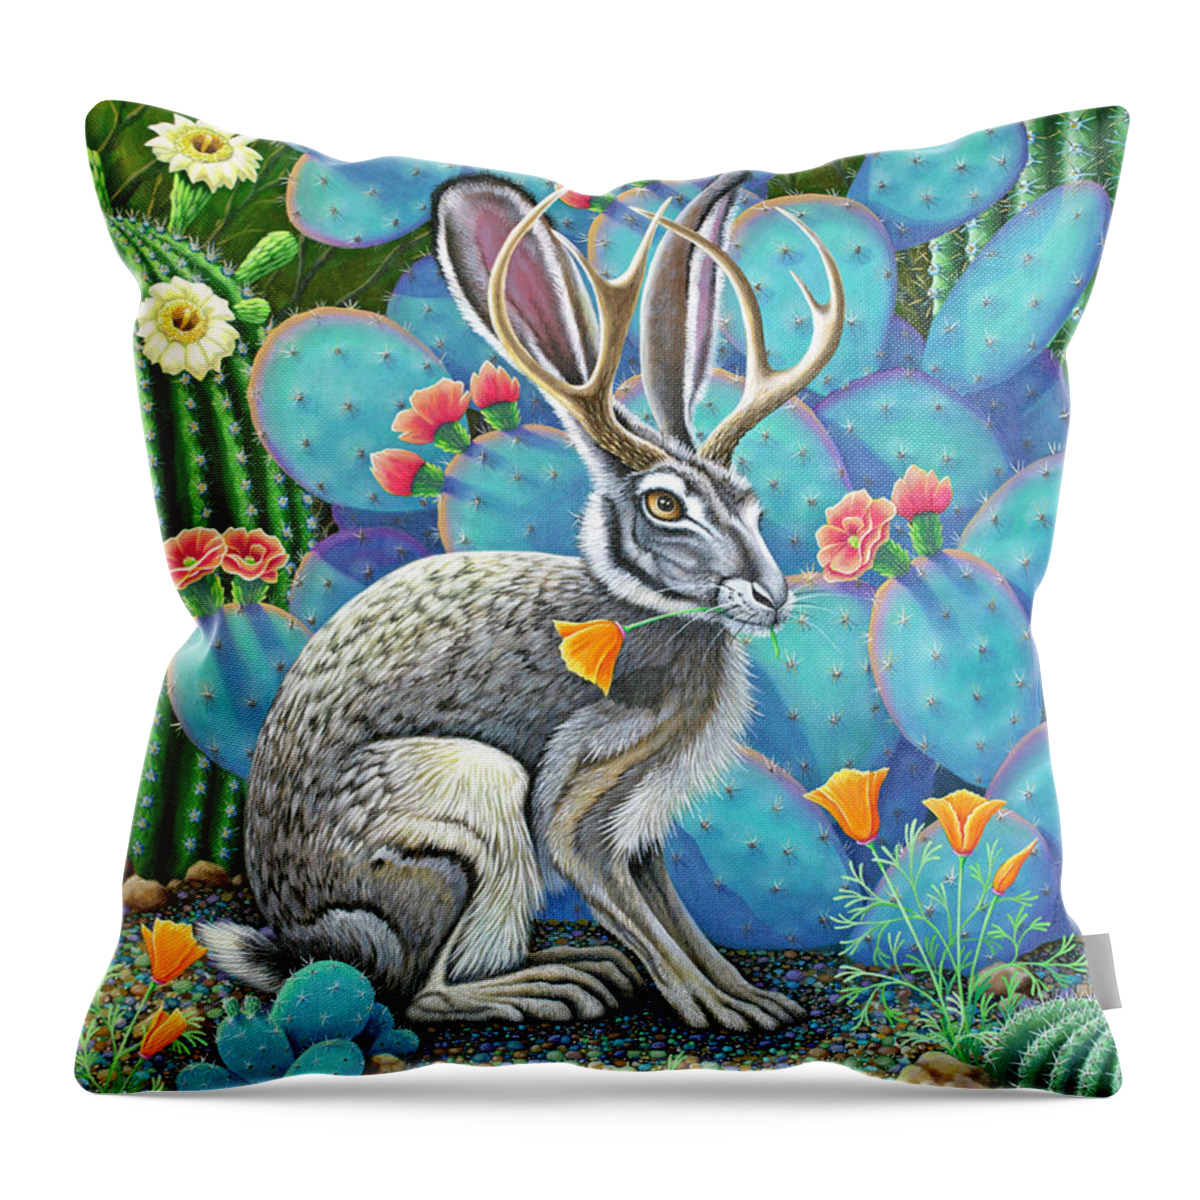 Jackalope Throw Pillow featuring the painting Southwestern Jackalope by Tish Wynne